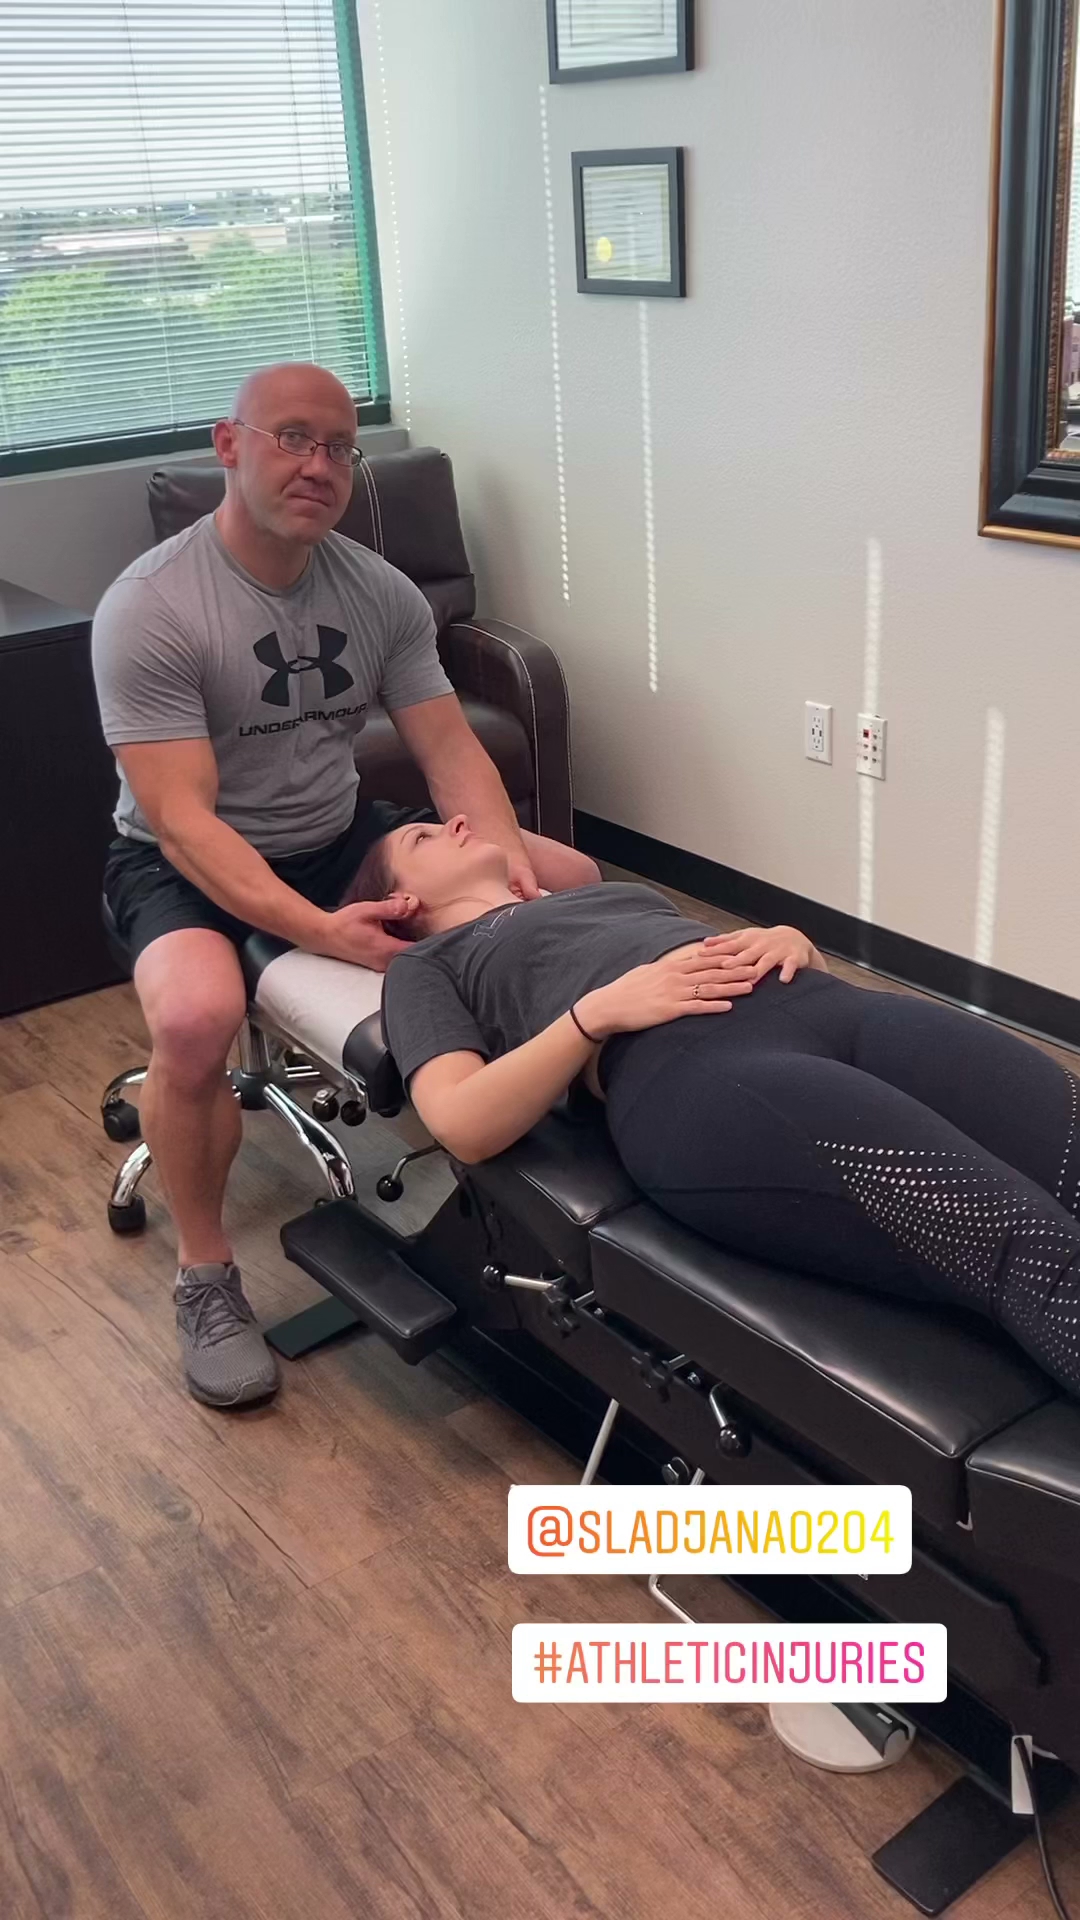 Muscle Chiropractic, PLLC